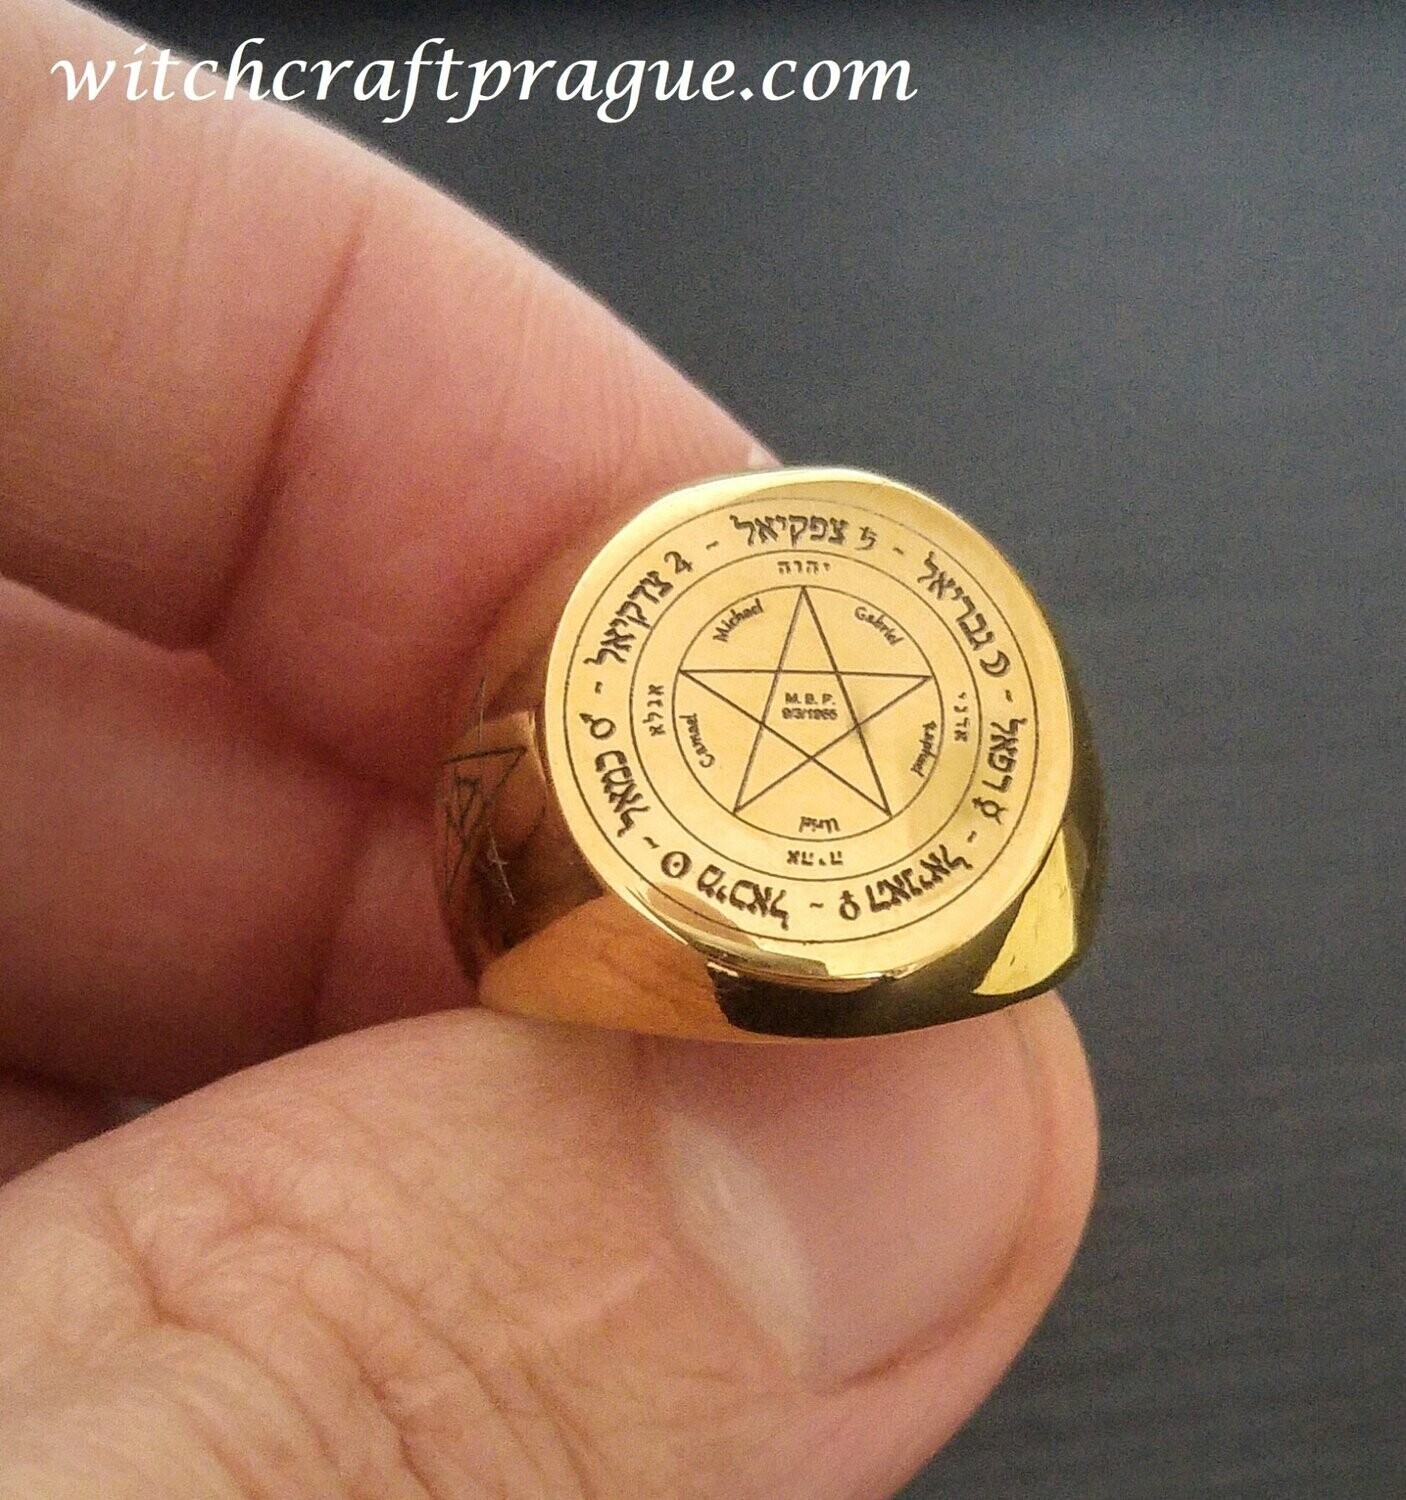 Custom witchcraft Archangels ring protection and blessing amulet